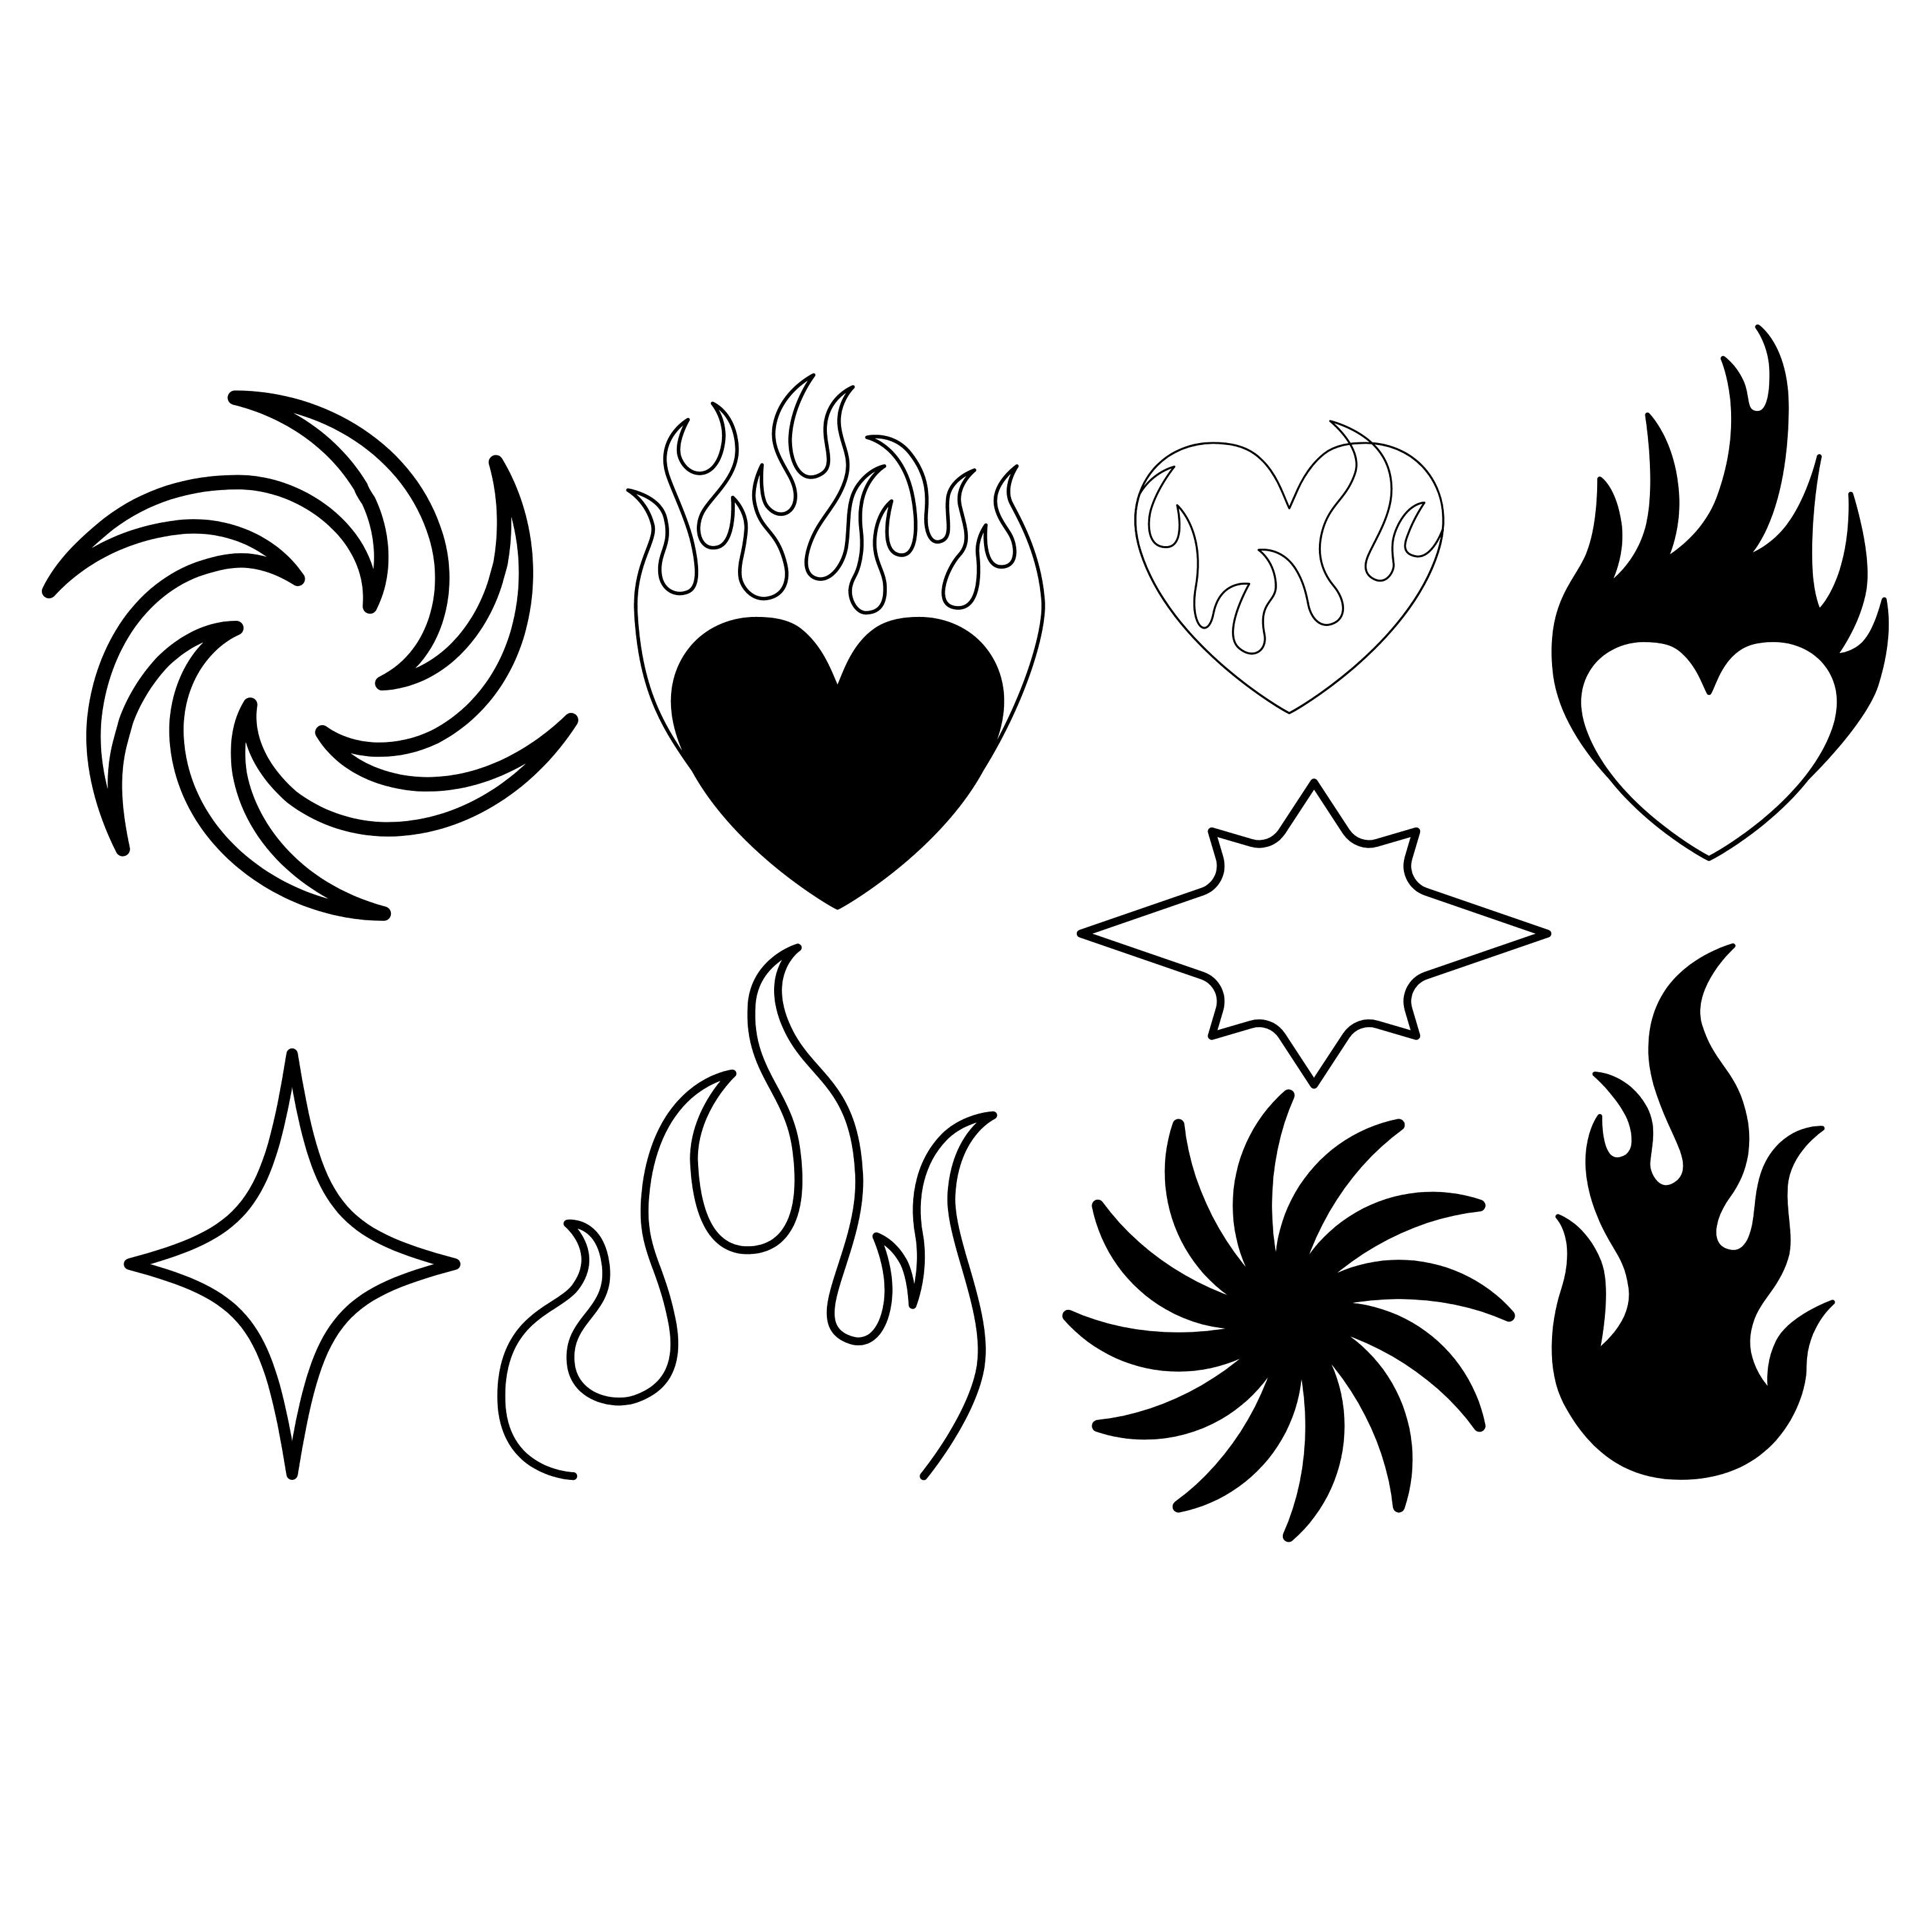 Fire flame tattoo Royalty Free Vector Image - VectorStock